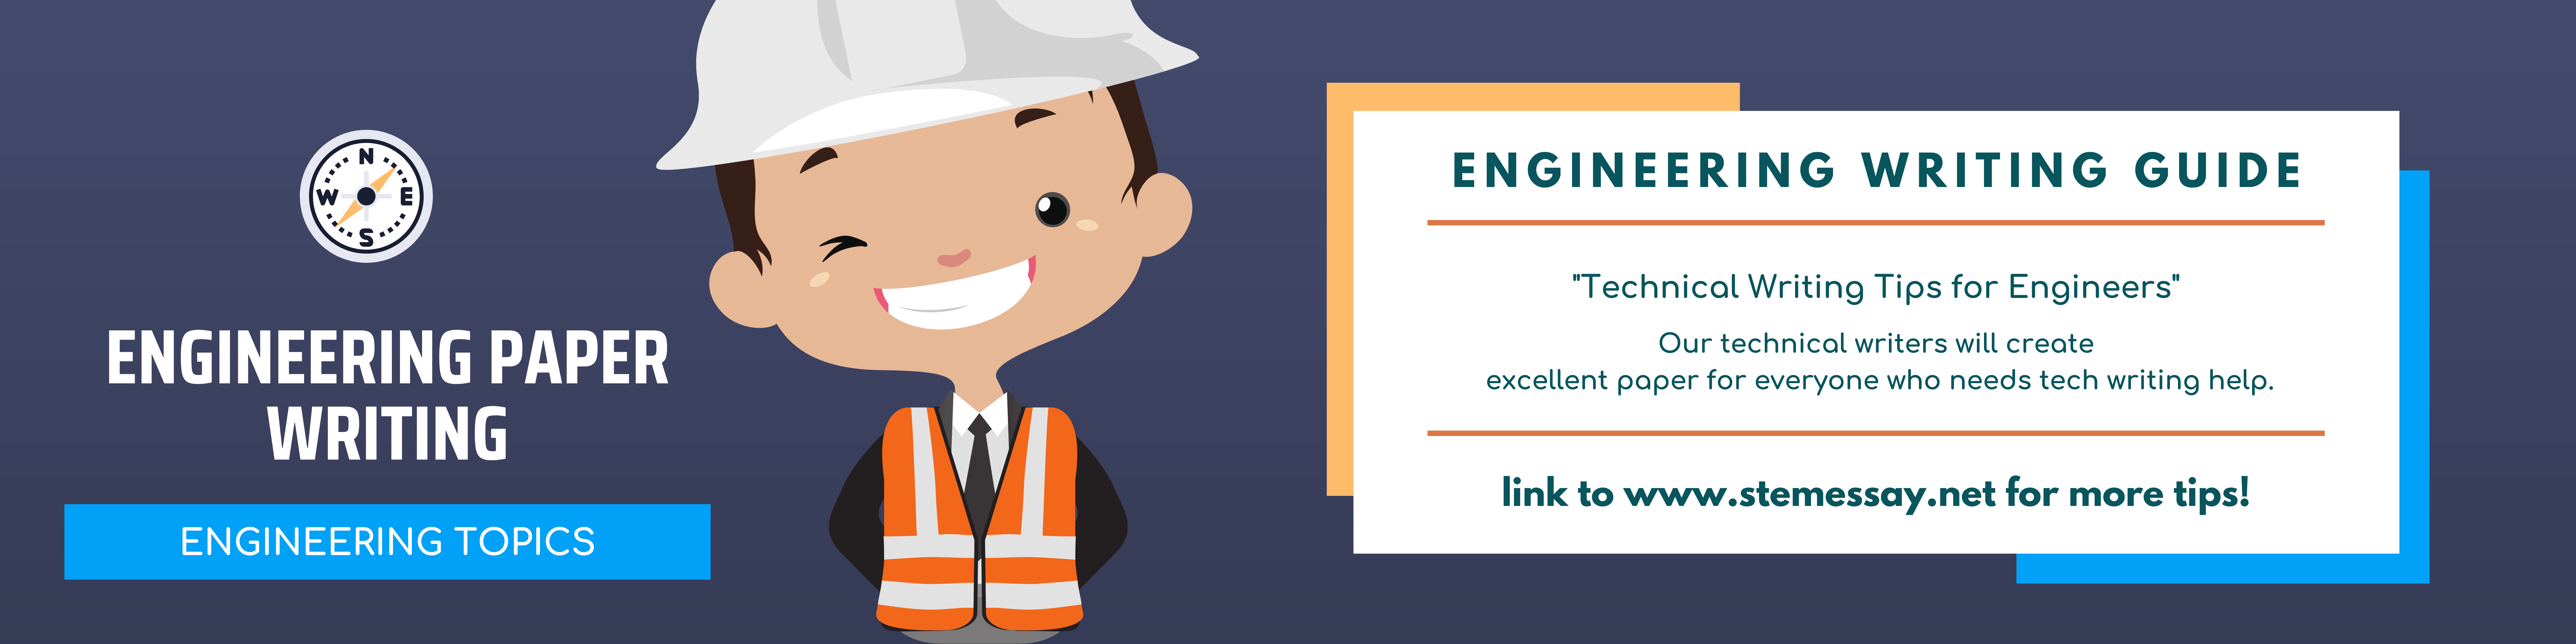 TECHNICAL WRITING TIPS FOR ENGINEERS Banner for StemEssay.net